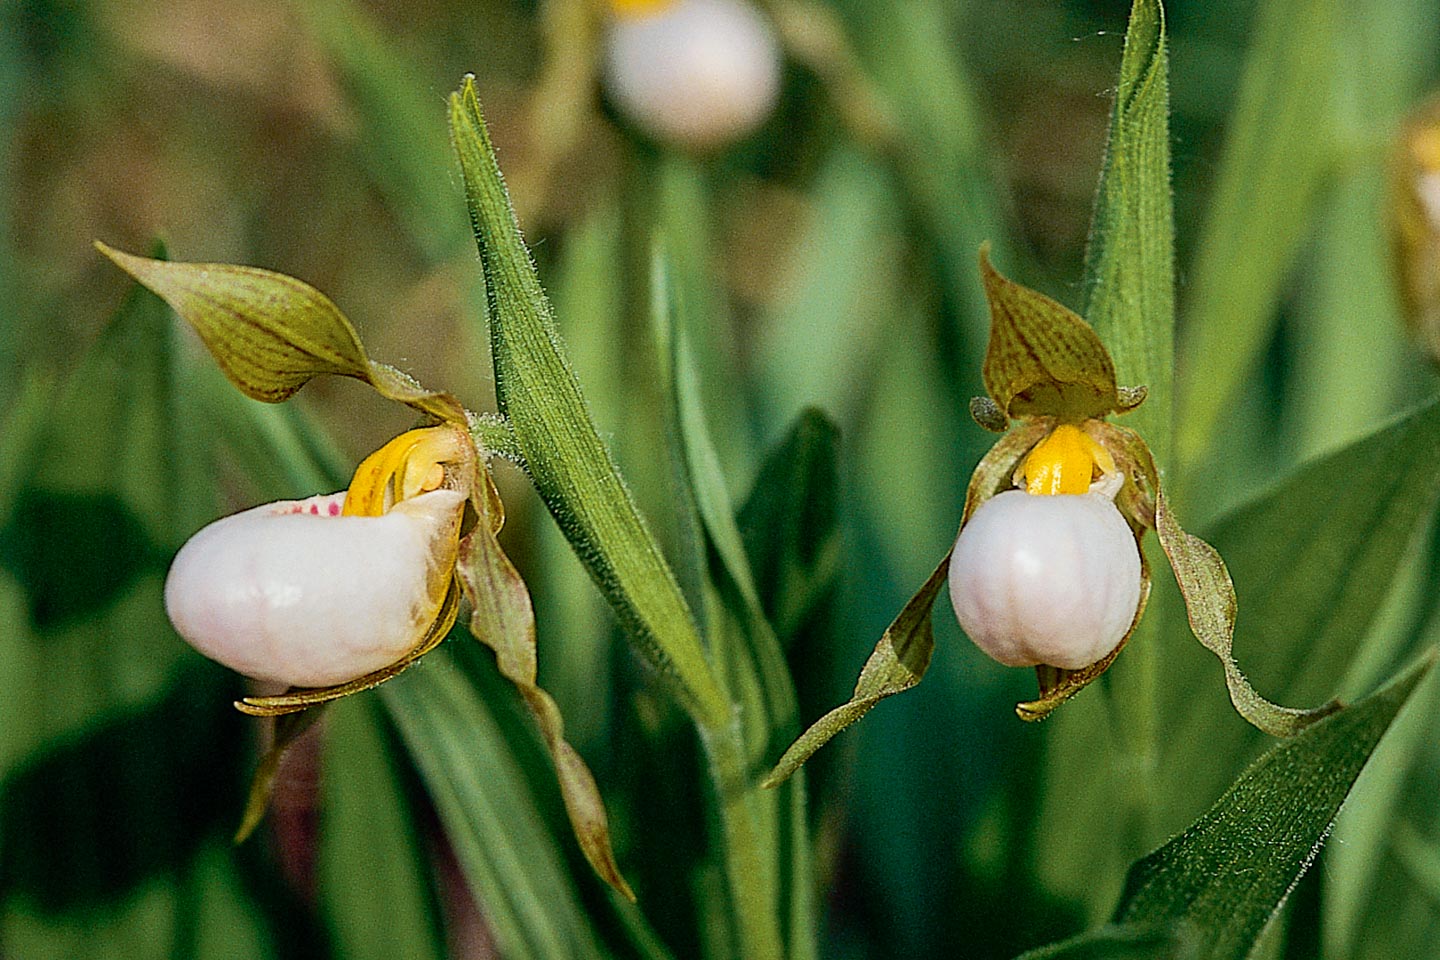 Small White Lady's Slippers